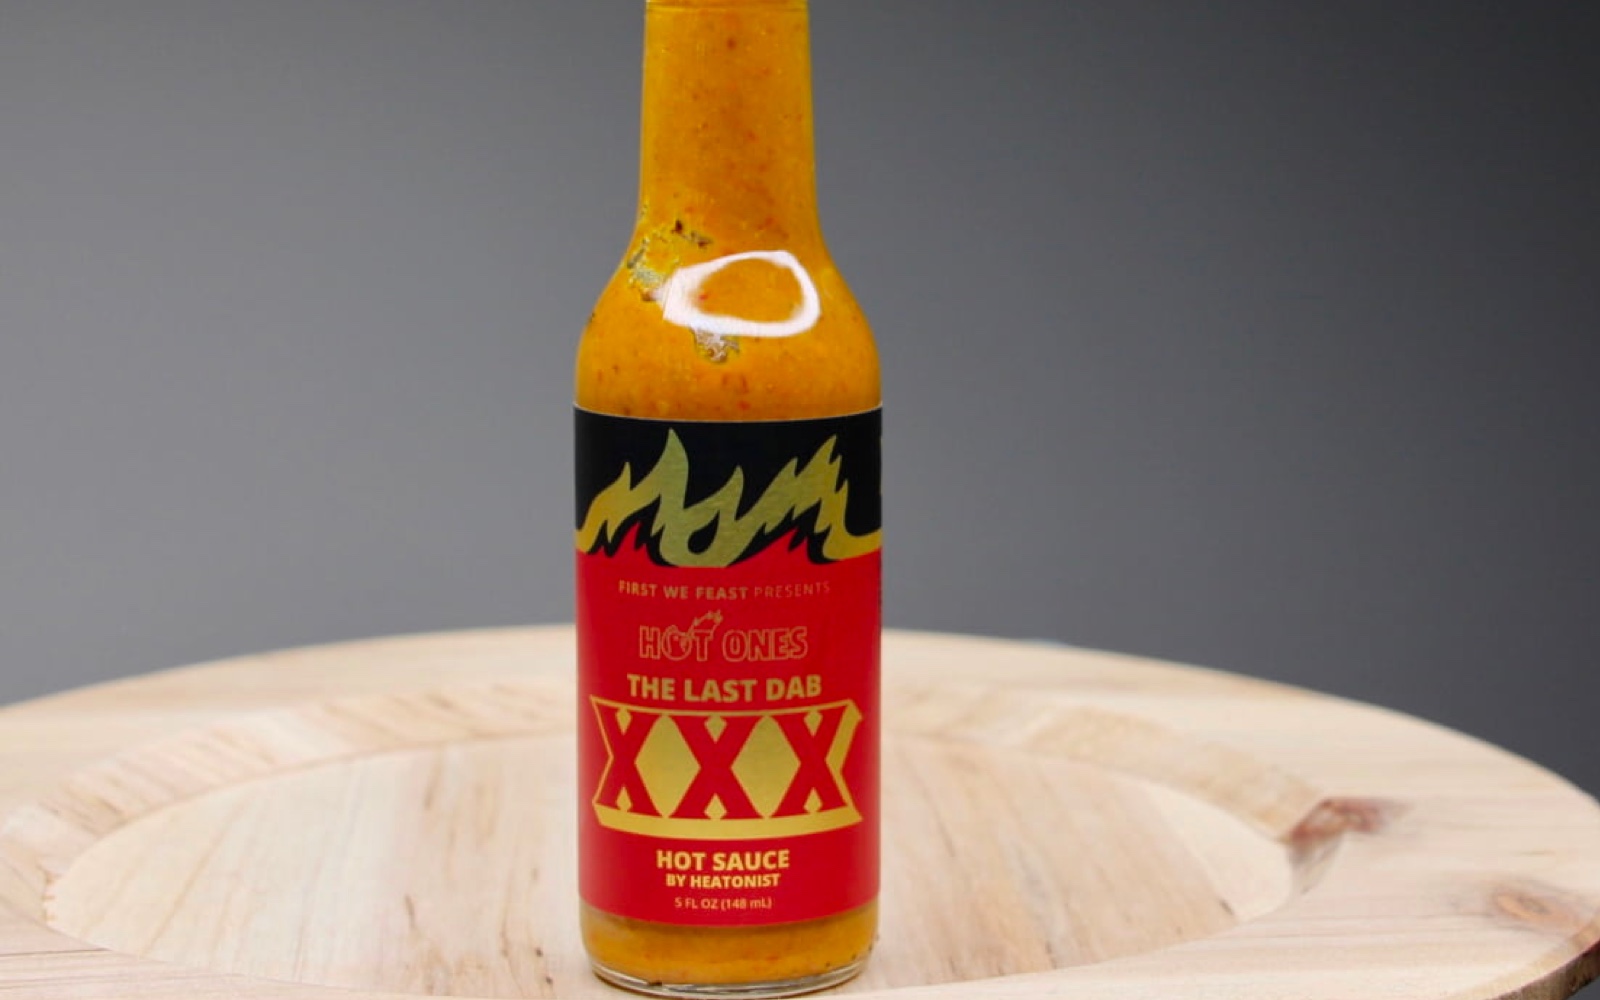 Hot Ones The Last Dab XXX from Heatonist